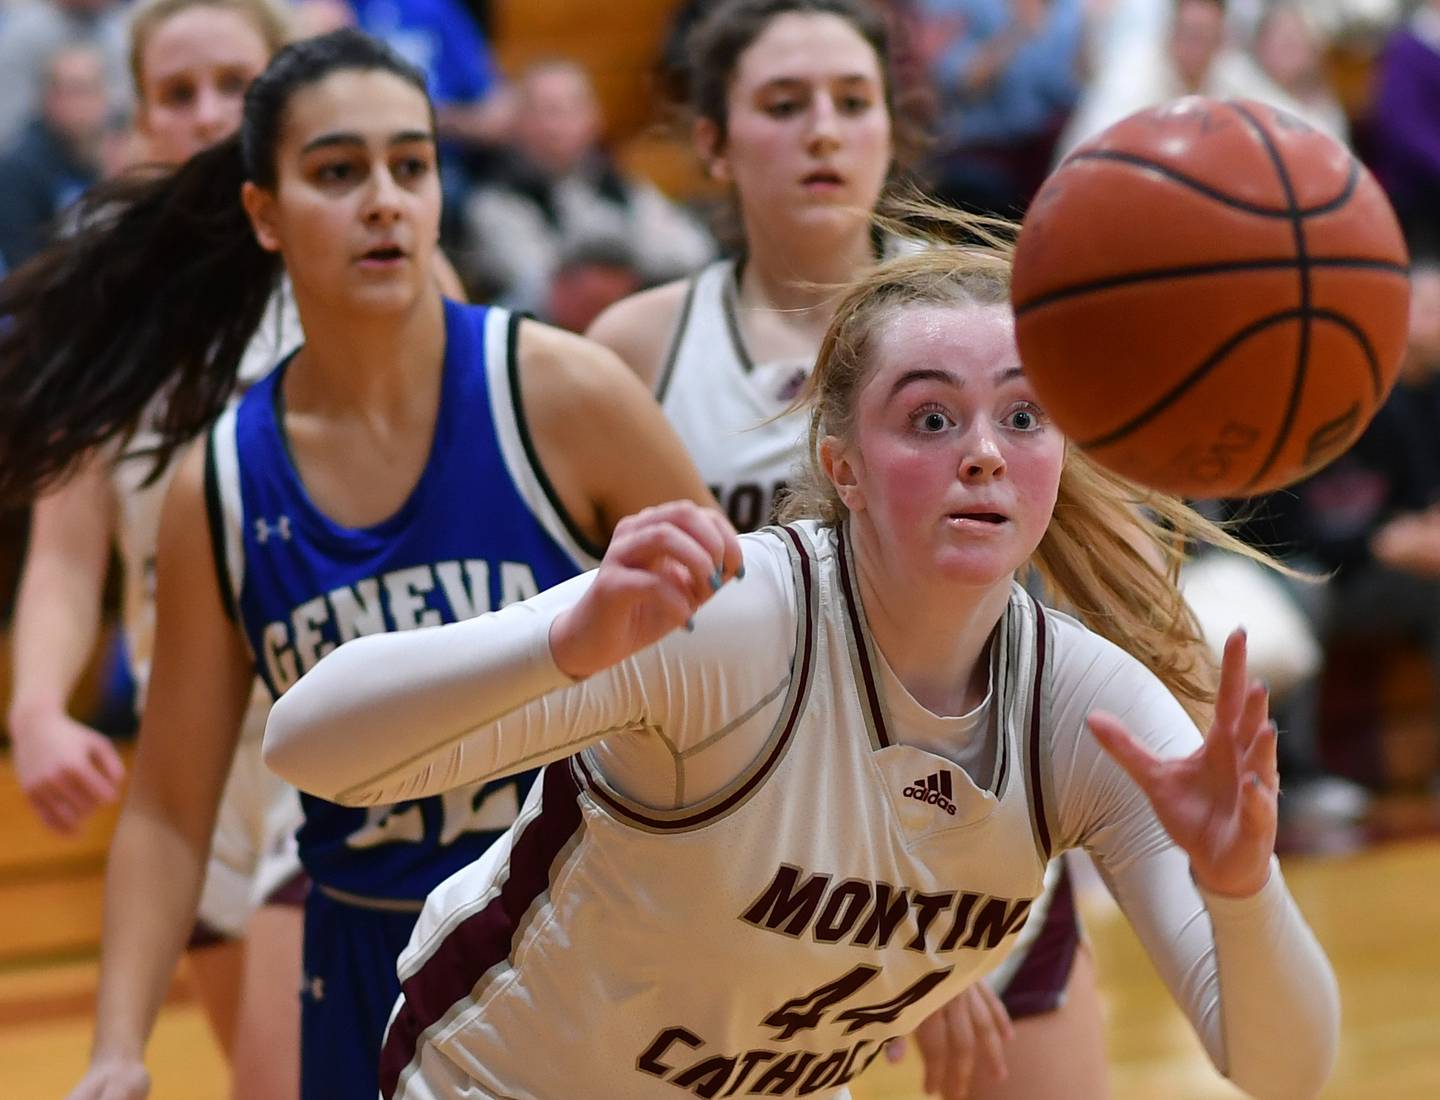 Montini's Ellie Helm (44) goes after a loose ball during a Coach Kipp Hoopsfest game against Geneva on Jan. 14, 2023 at Montini Catholic High School in Lombard.